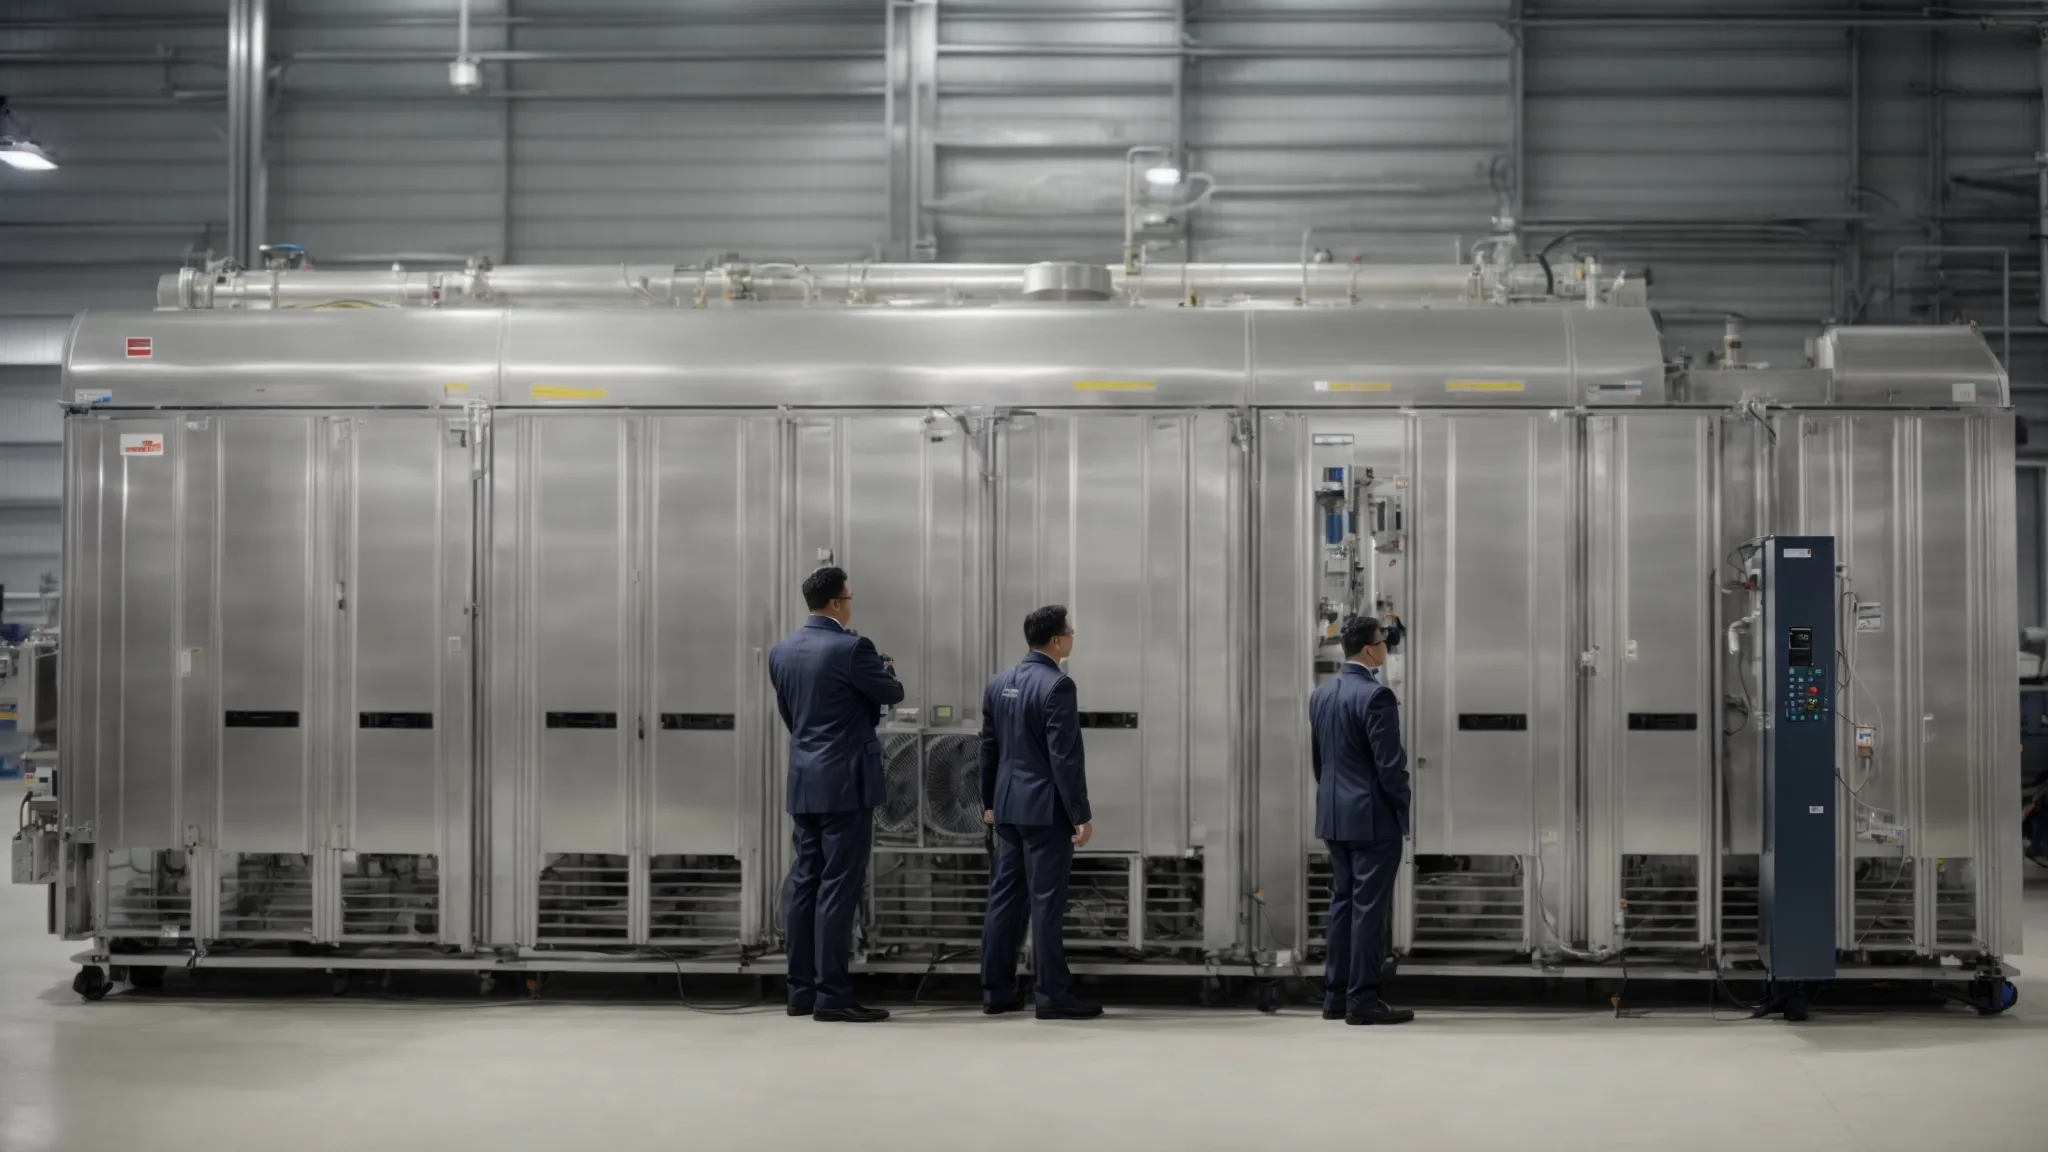 a team of engineers stands before an expansive, state-of-the-art refrigeration system featuring prominently labelled co2 technology components.